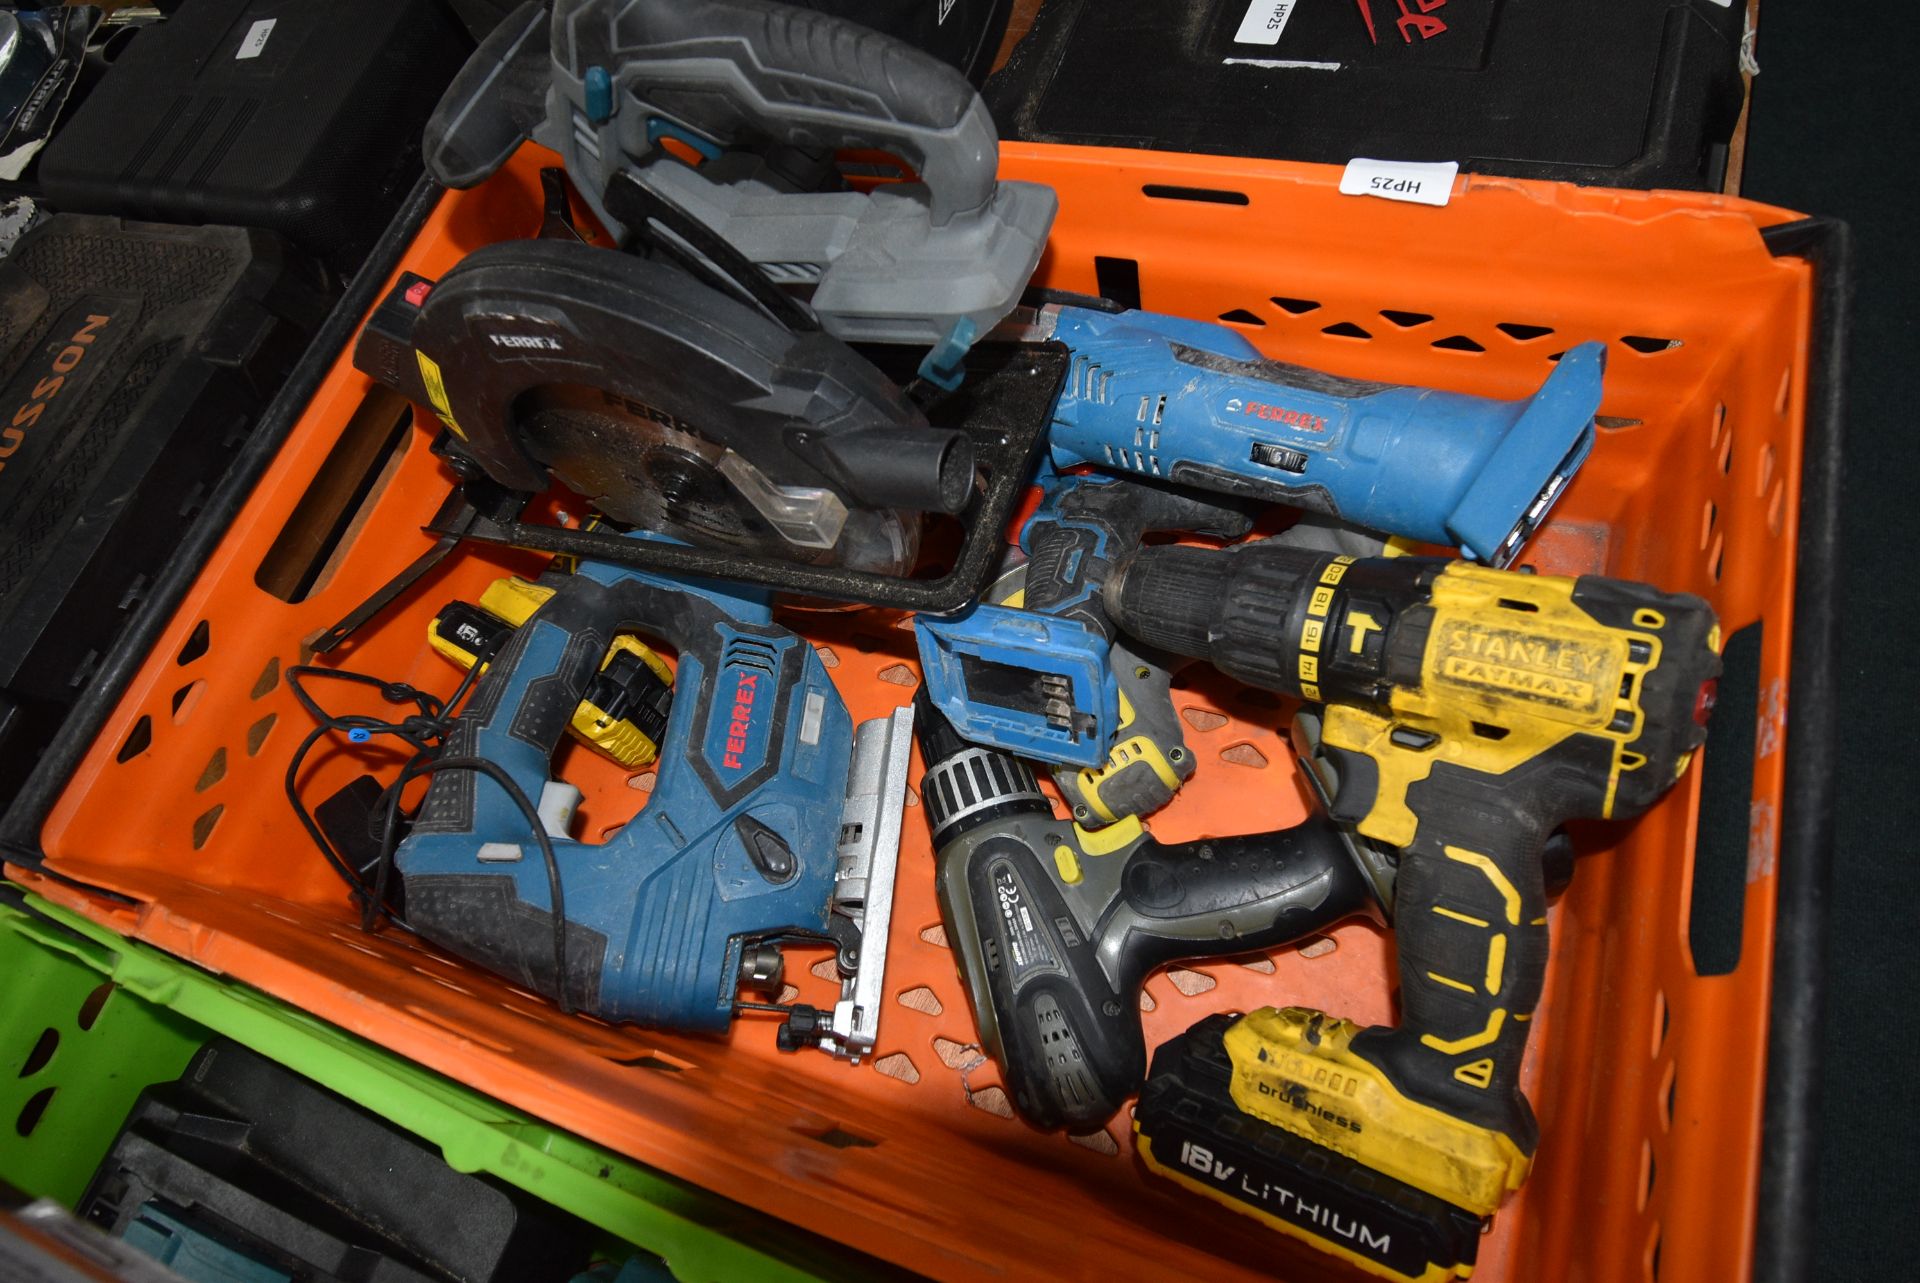 Eight Assorted Battery Operated Drills, Saws, Nail Guns, etc.